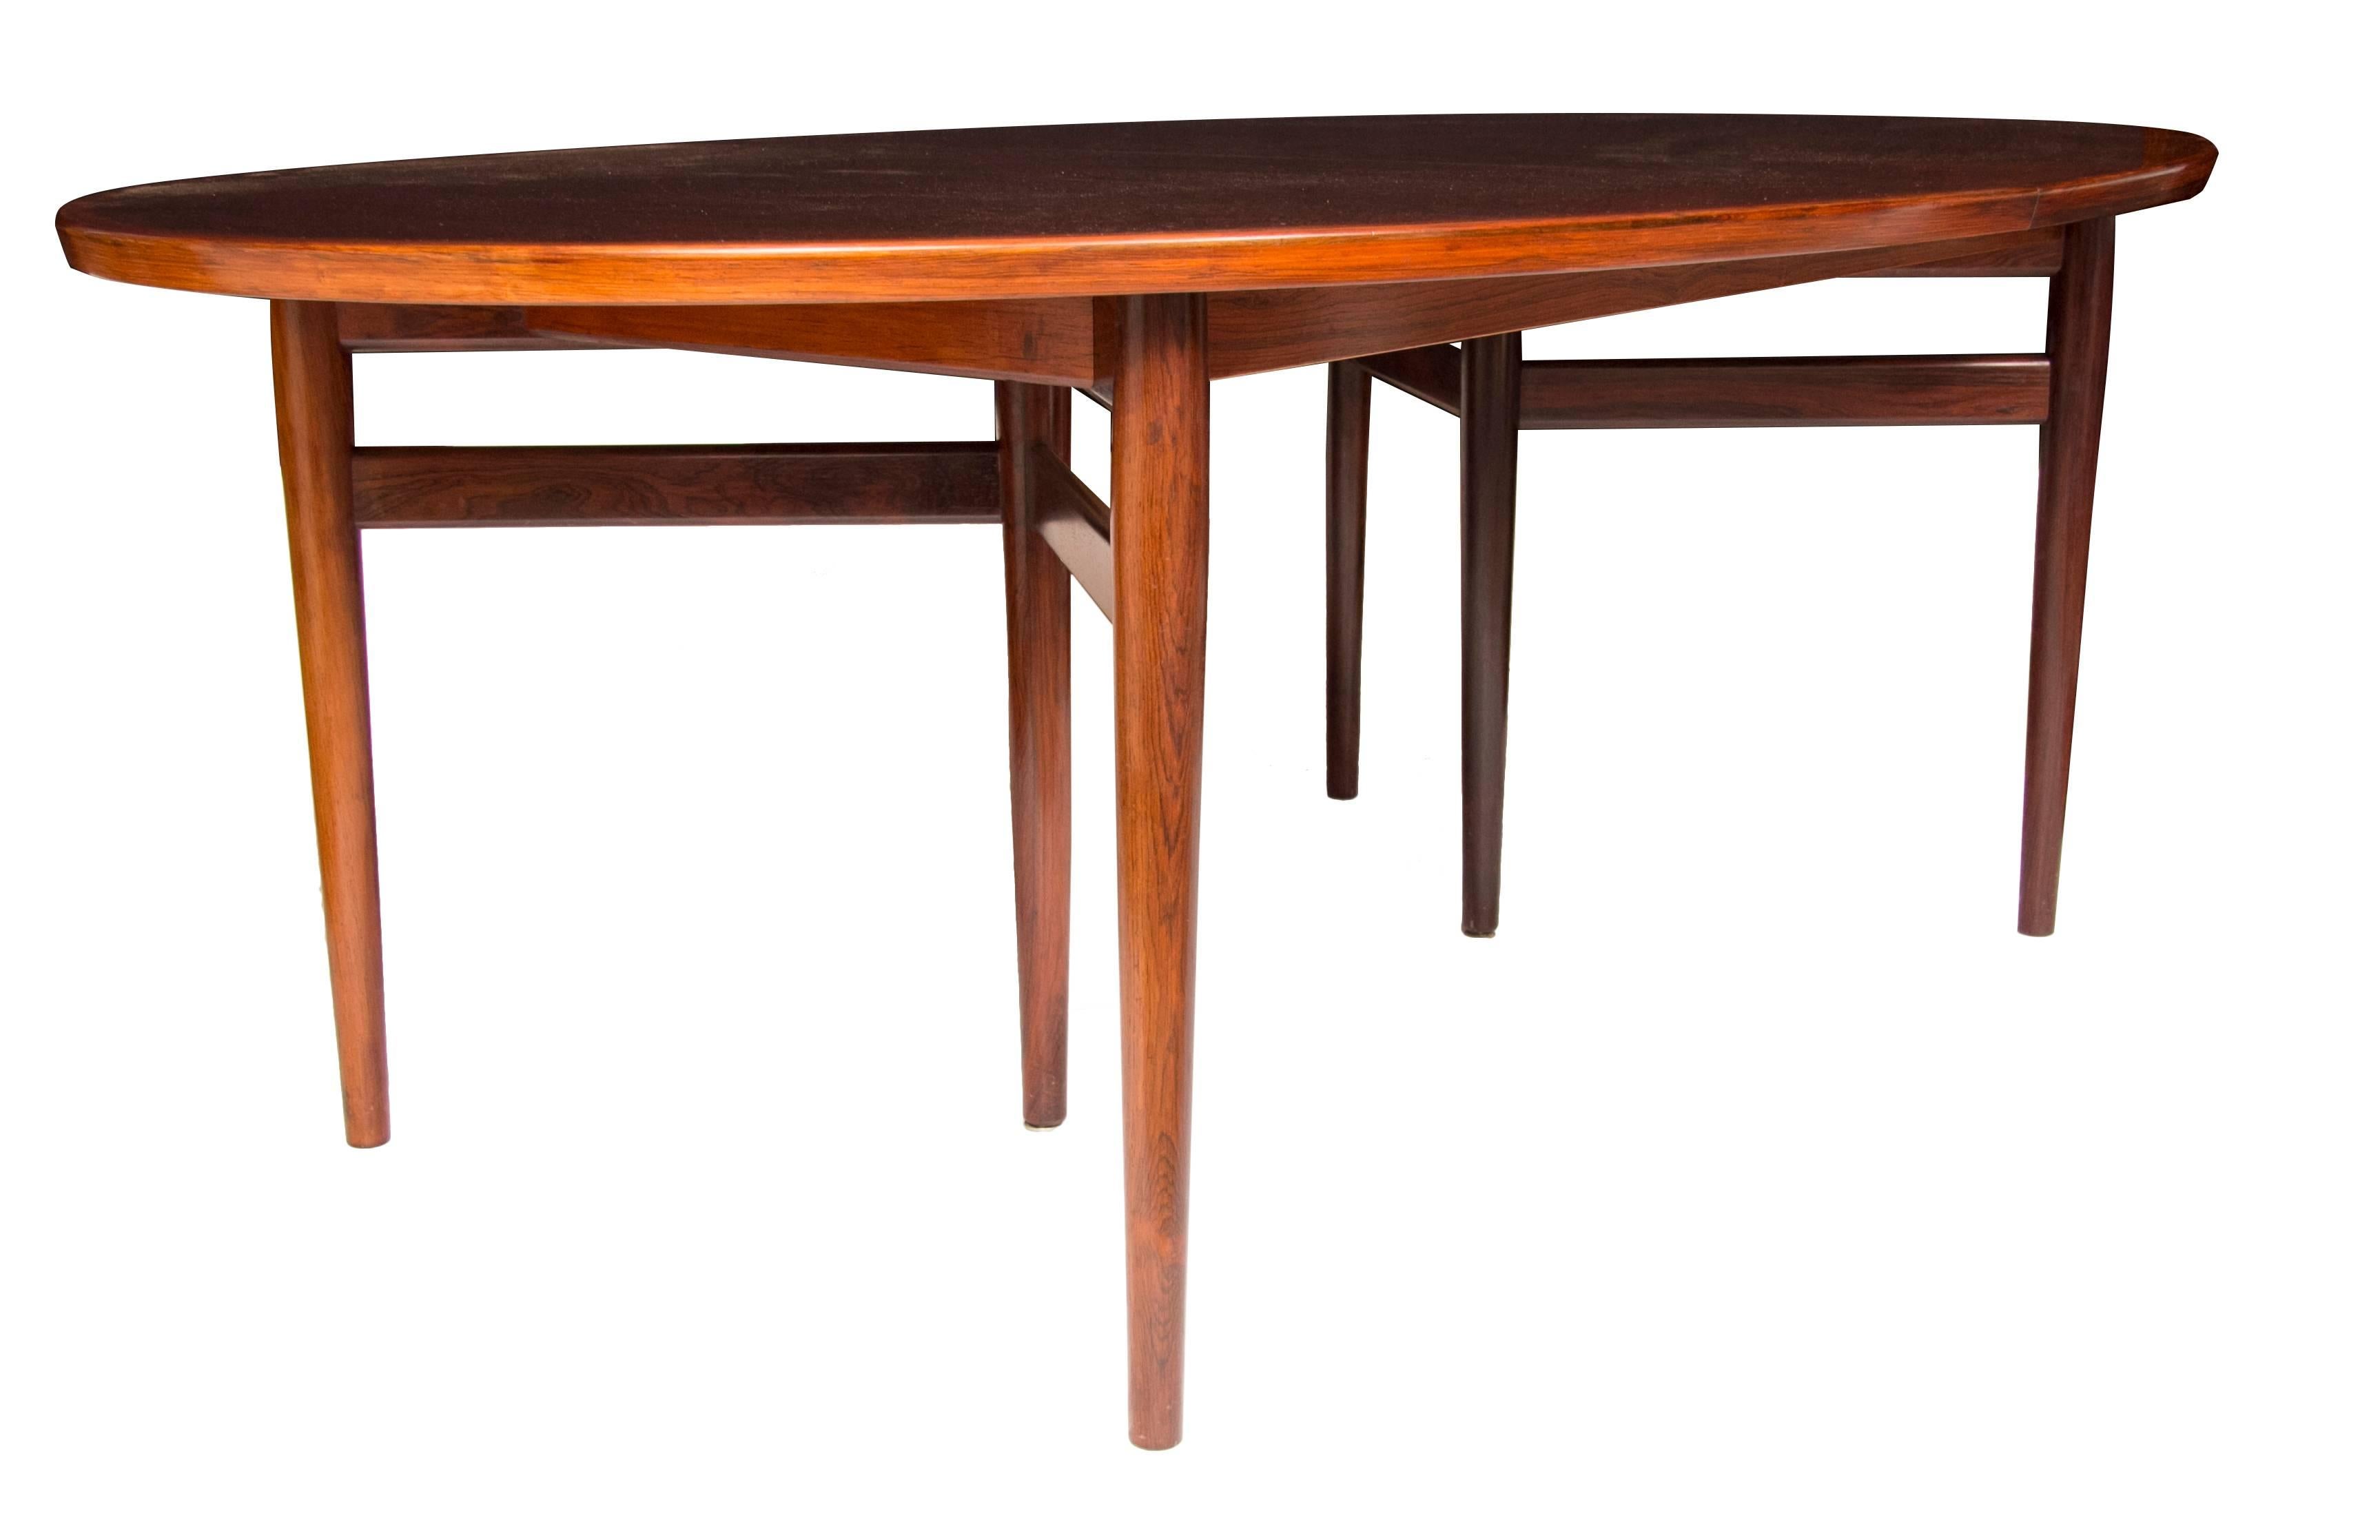 Midcentury rosewood dining table by Arne Vodder for Sibast.
Measures: 125cm diameter with two leaves extending to 199cm x 125cm and 298 x 125cm.
Professionally restored.